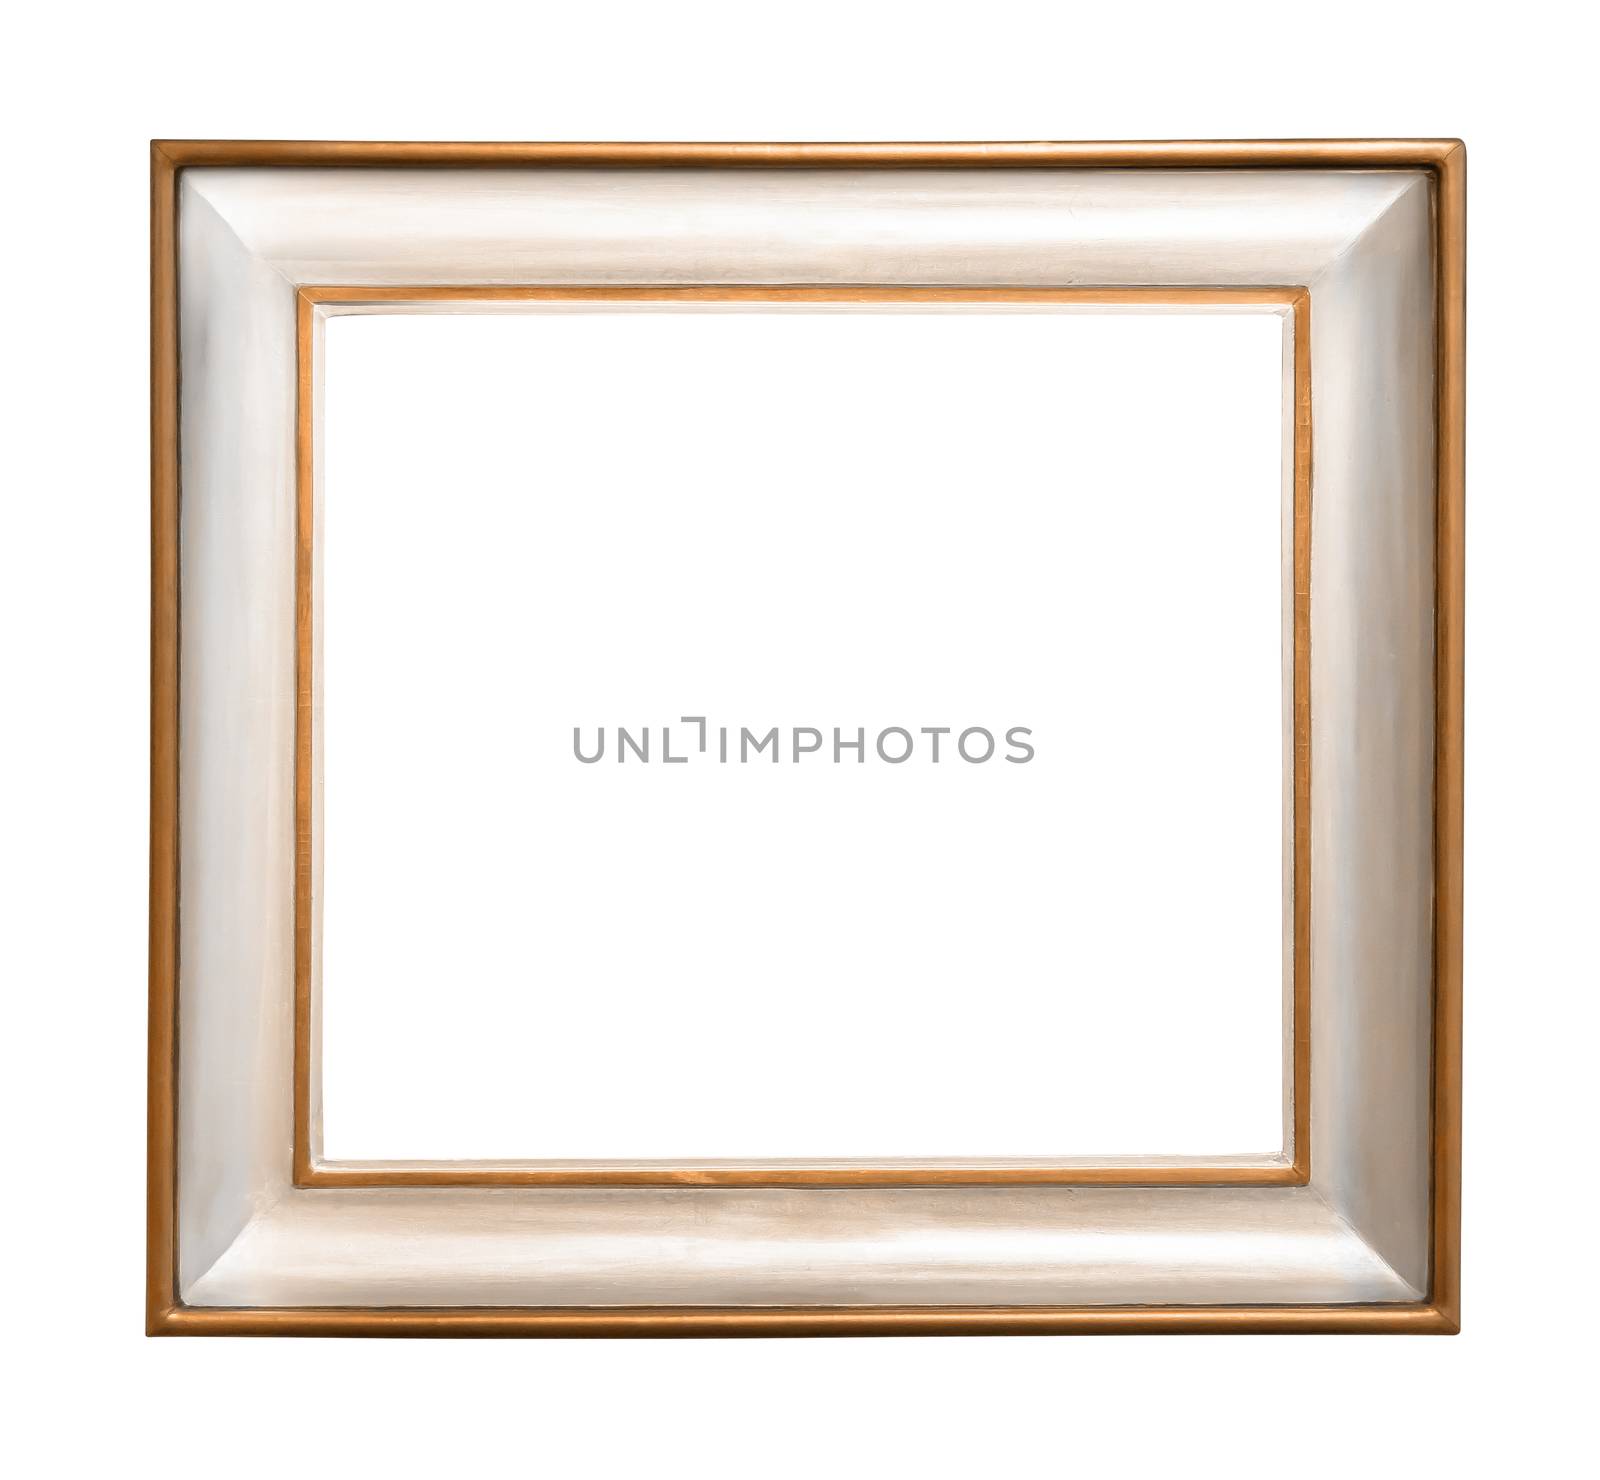 Decorative picture frame on white background by mkos83